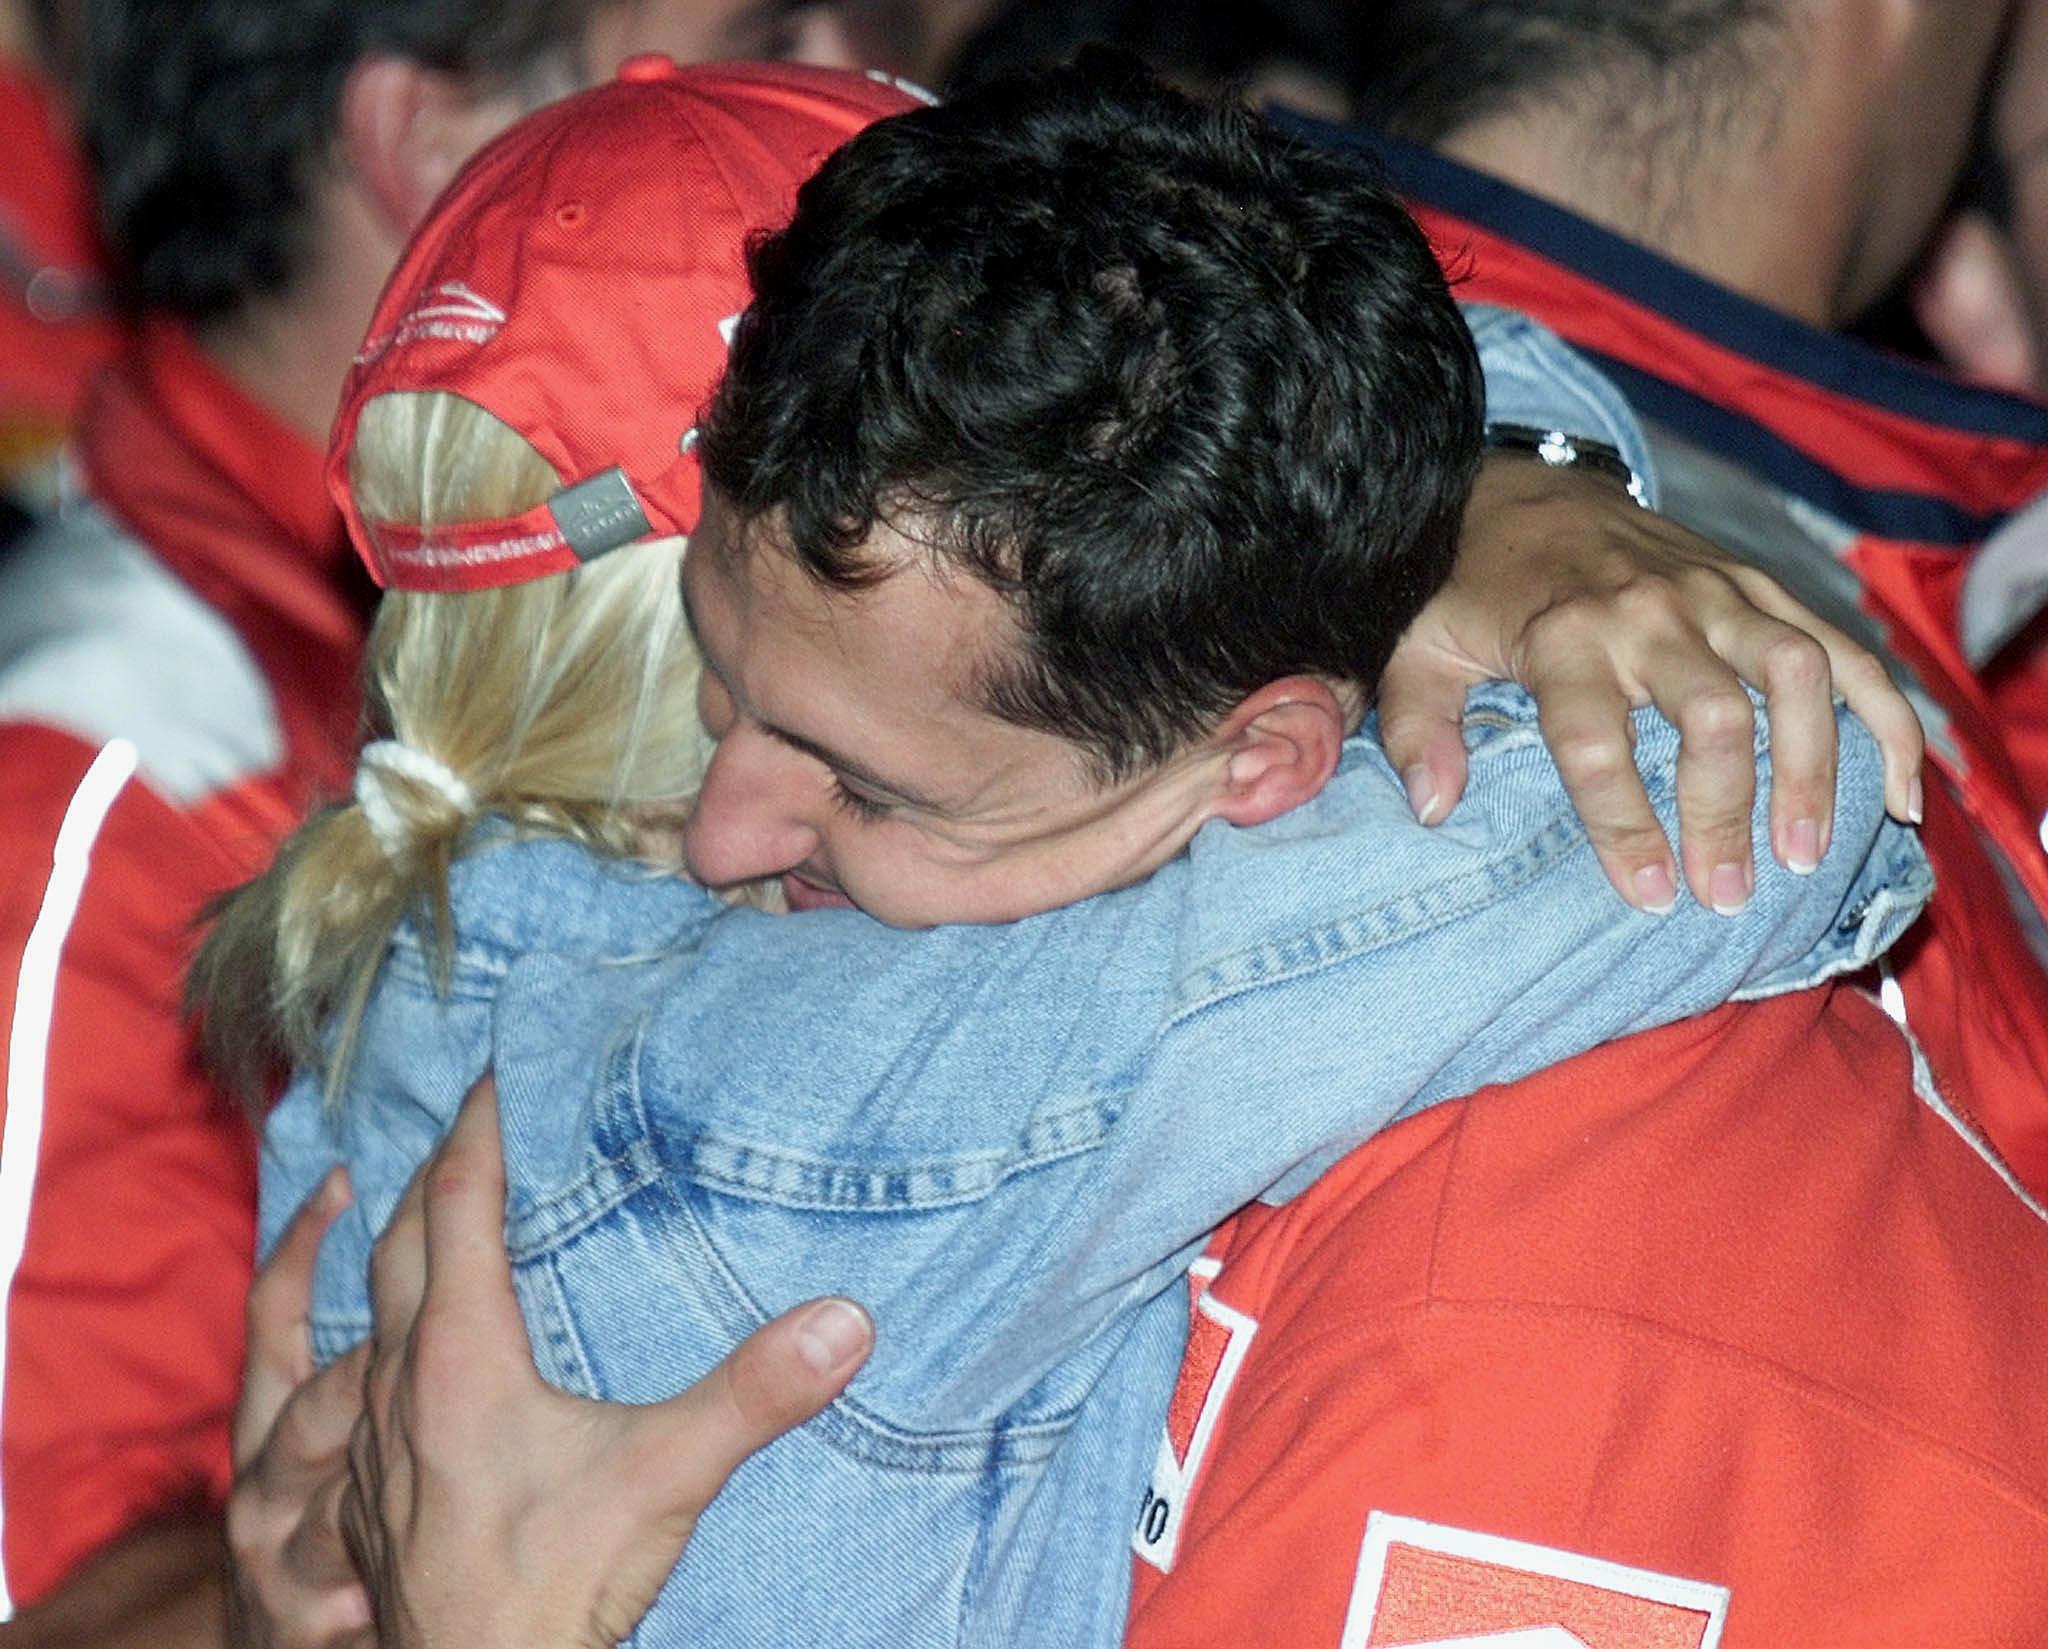 Ferrari driver Michael Schumacher (R) hugs Corinna Schumacher (L) in the pits to celebrate his victory in the Formula One Japanese Grand Prix as well as his 2000 Formula One World Championship title, after the race in Suzuka, on October 8, 2000. | Source: Getty Images